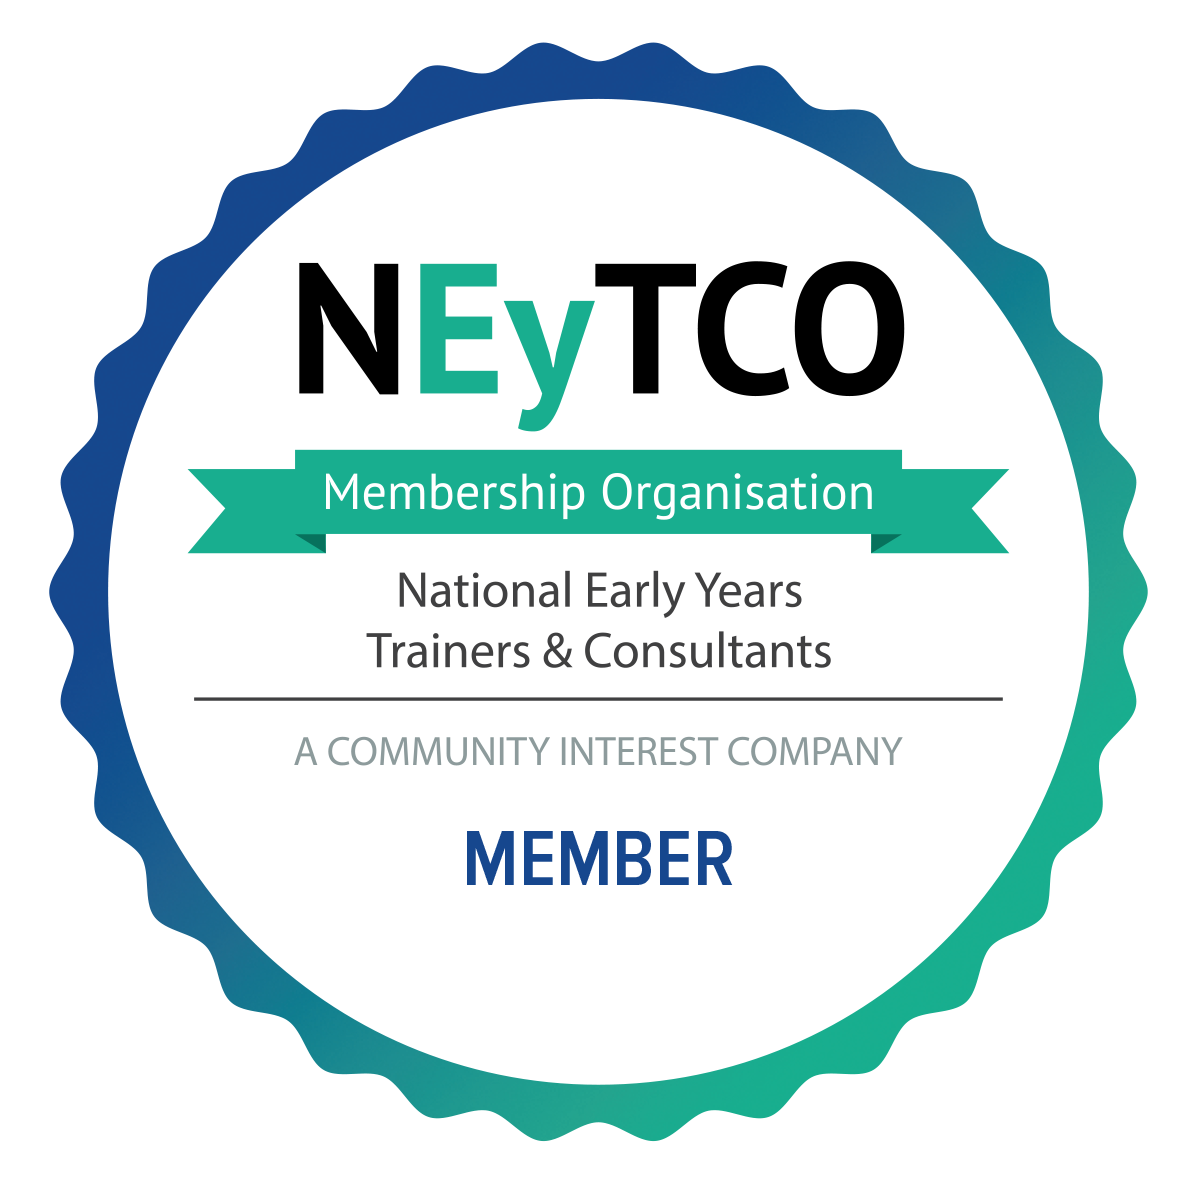 Member of NEYTCO, National Early Years Trainers & Consultants